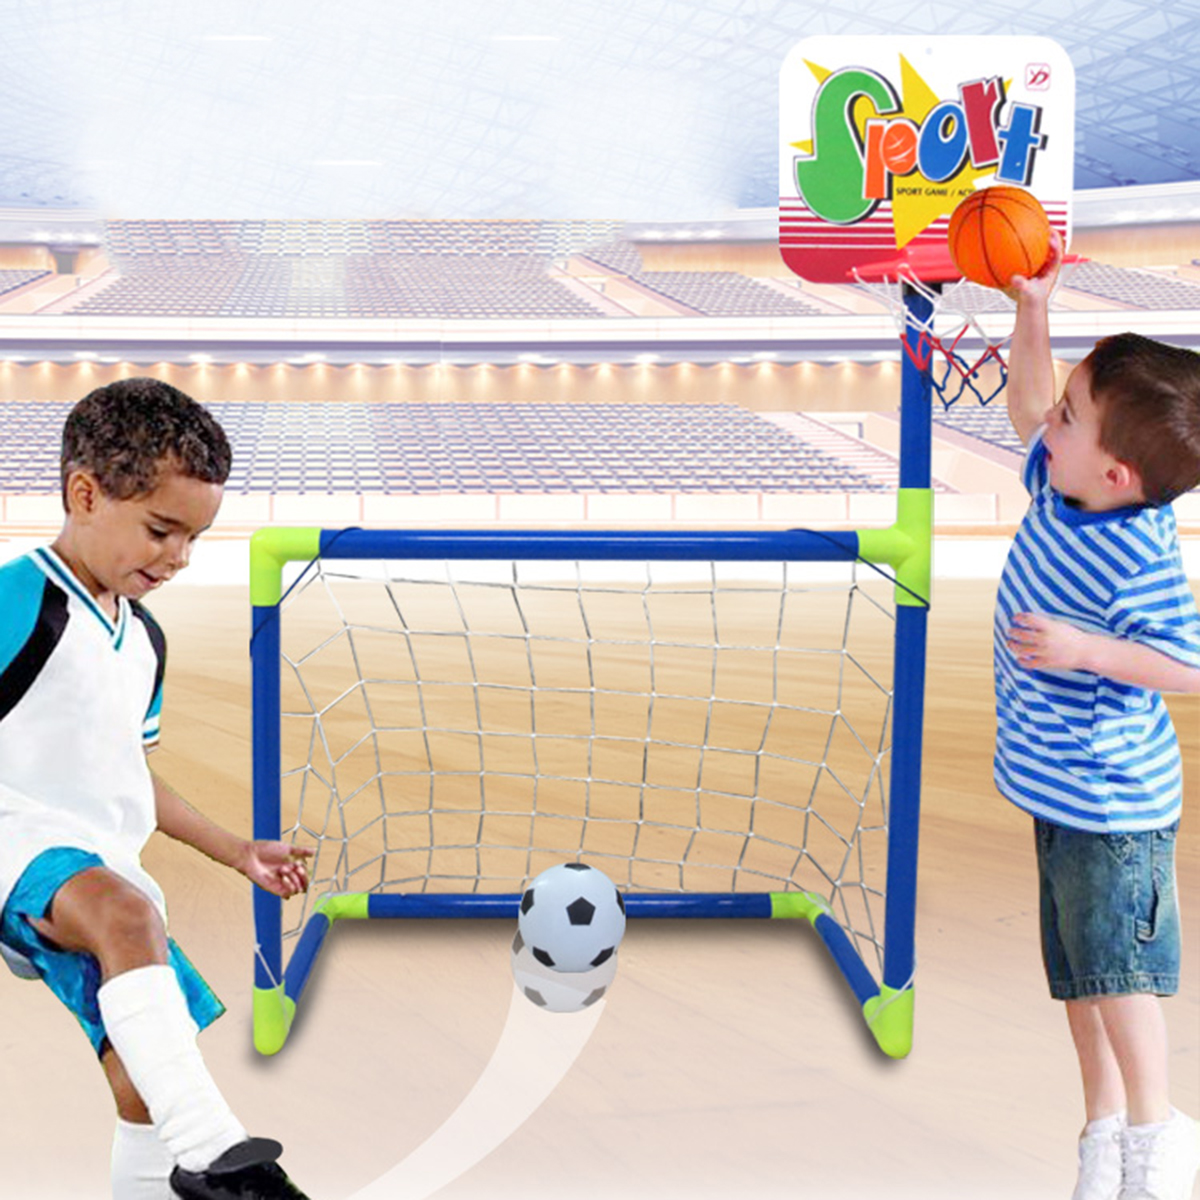 Ball-Football-Sport-Toy-Game-Goals-Basketball-Hoop-Stand-Toys-Kids-Sports-Game-1685455-3